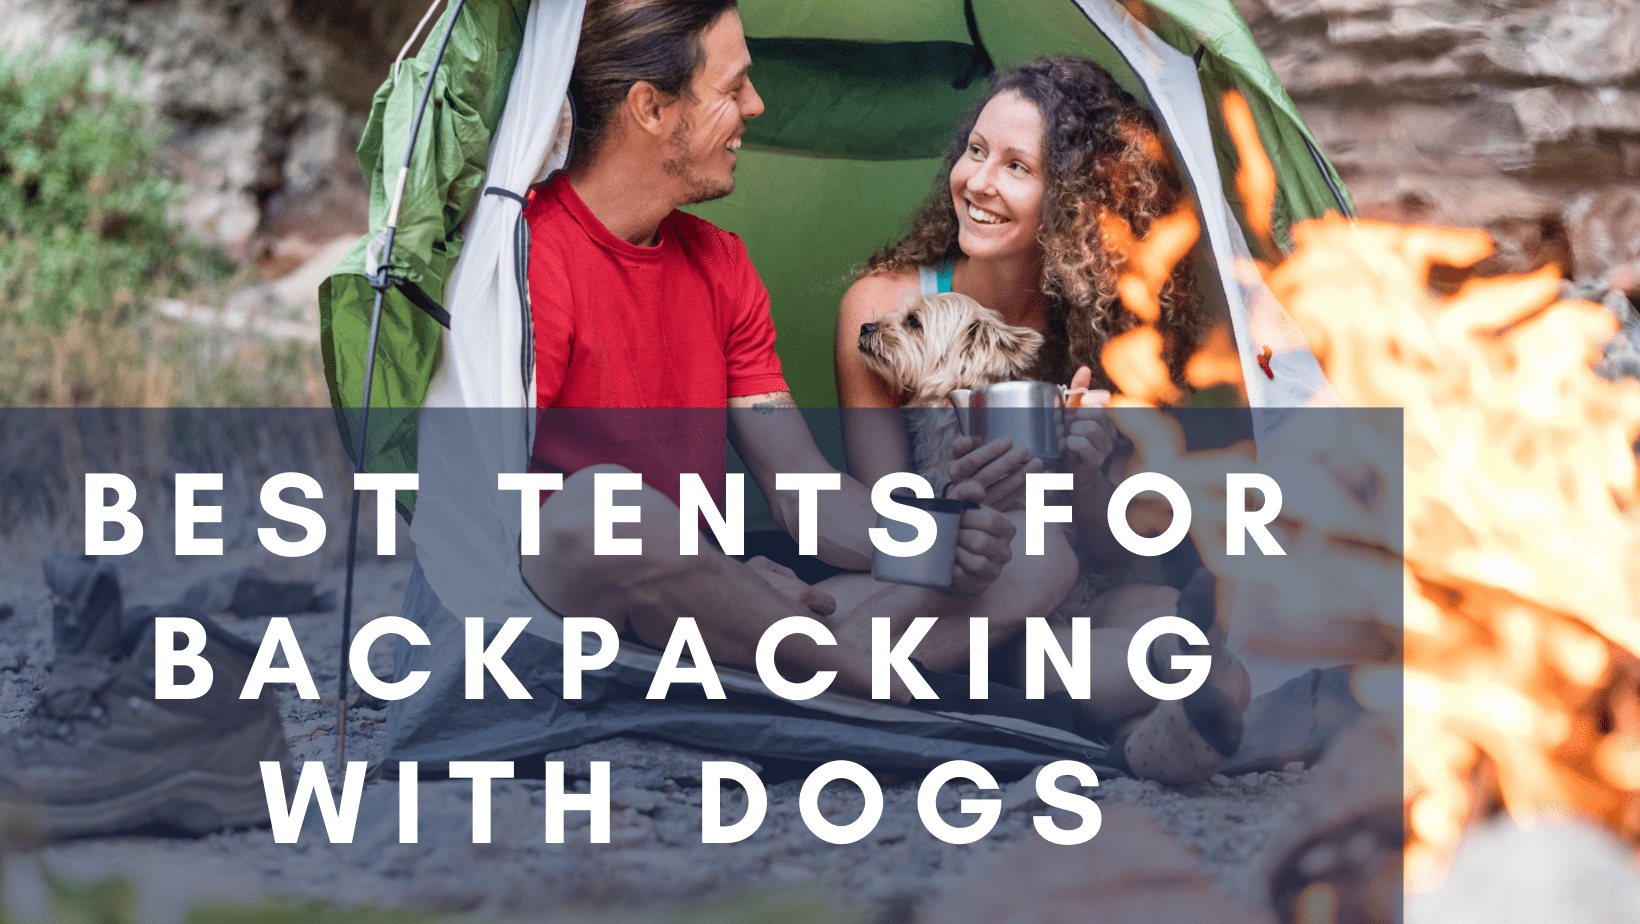 Best Tents for Backpacking with Dogs